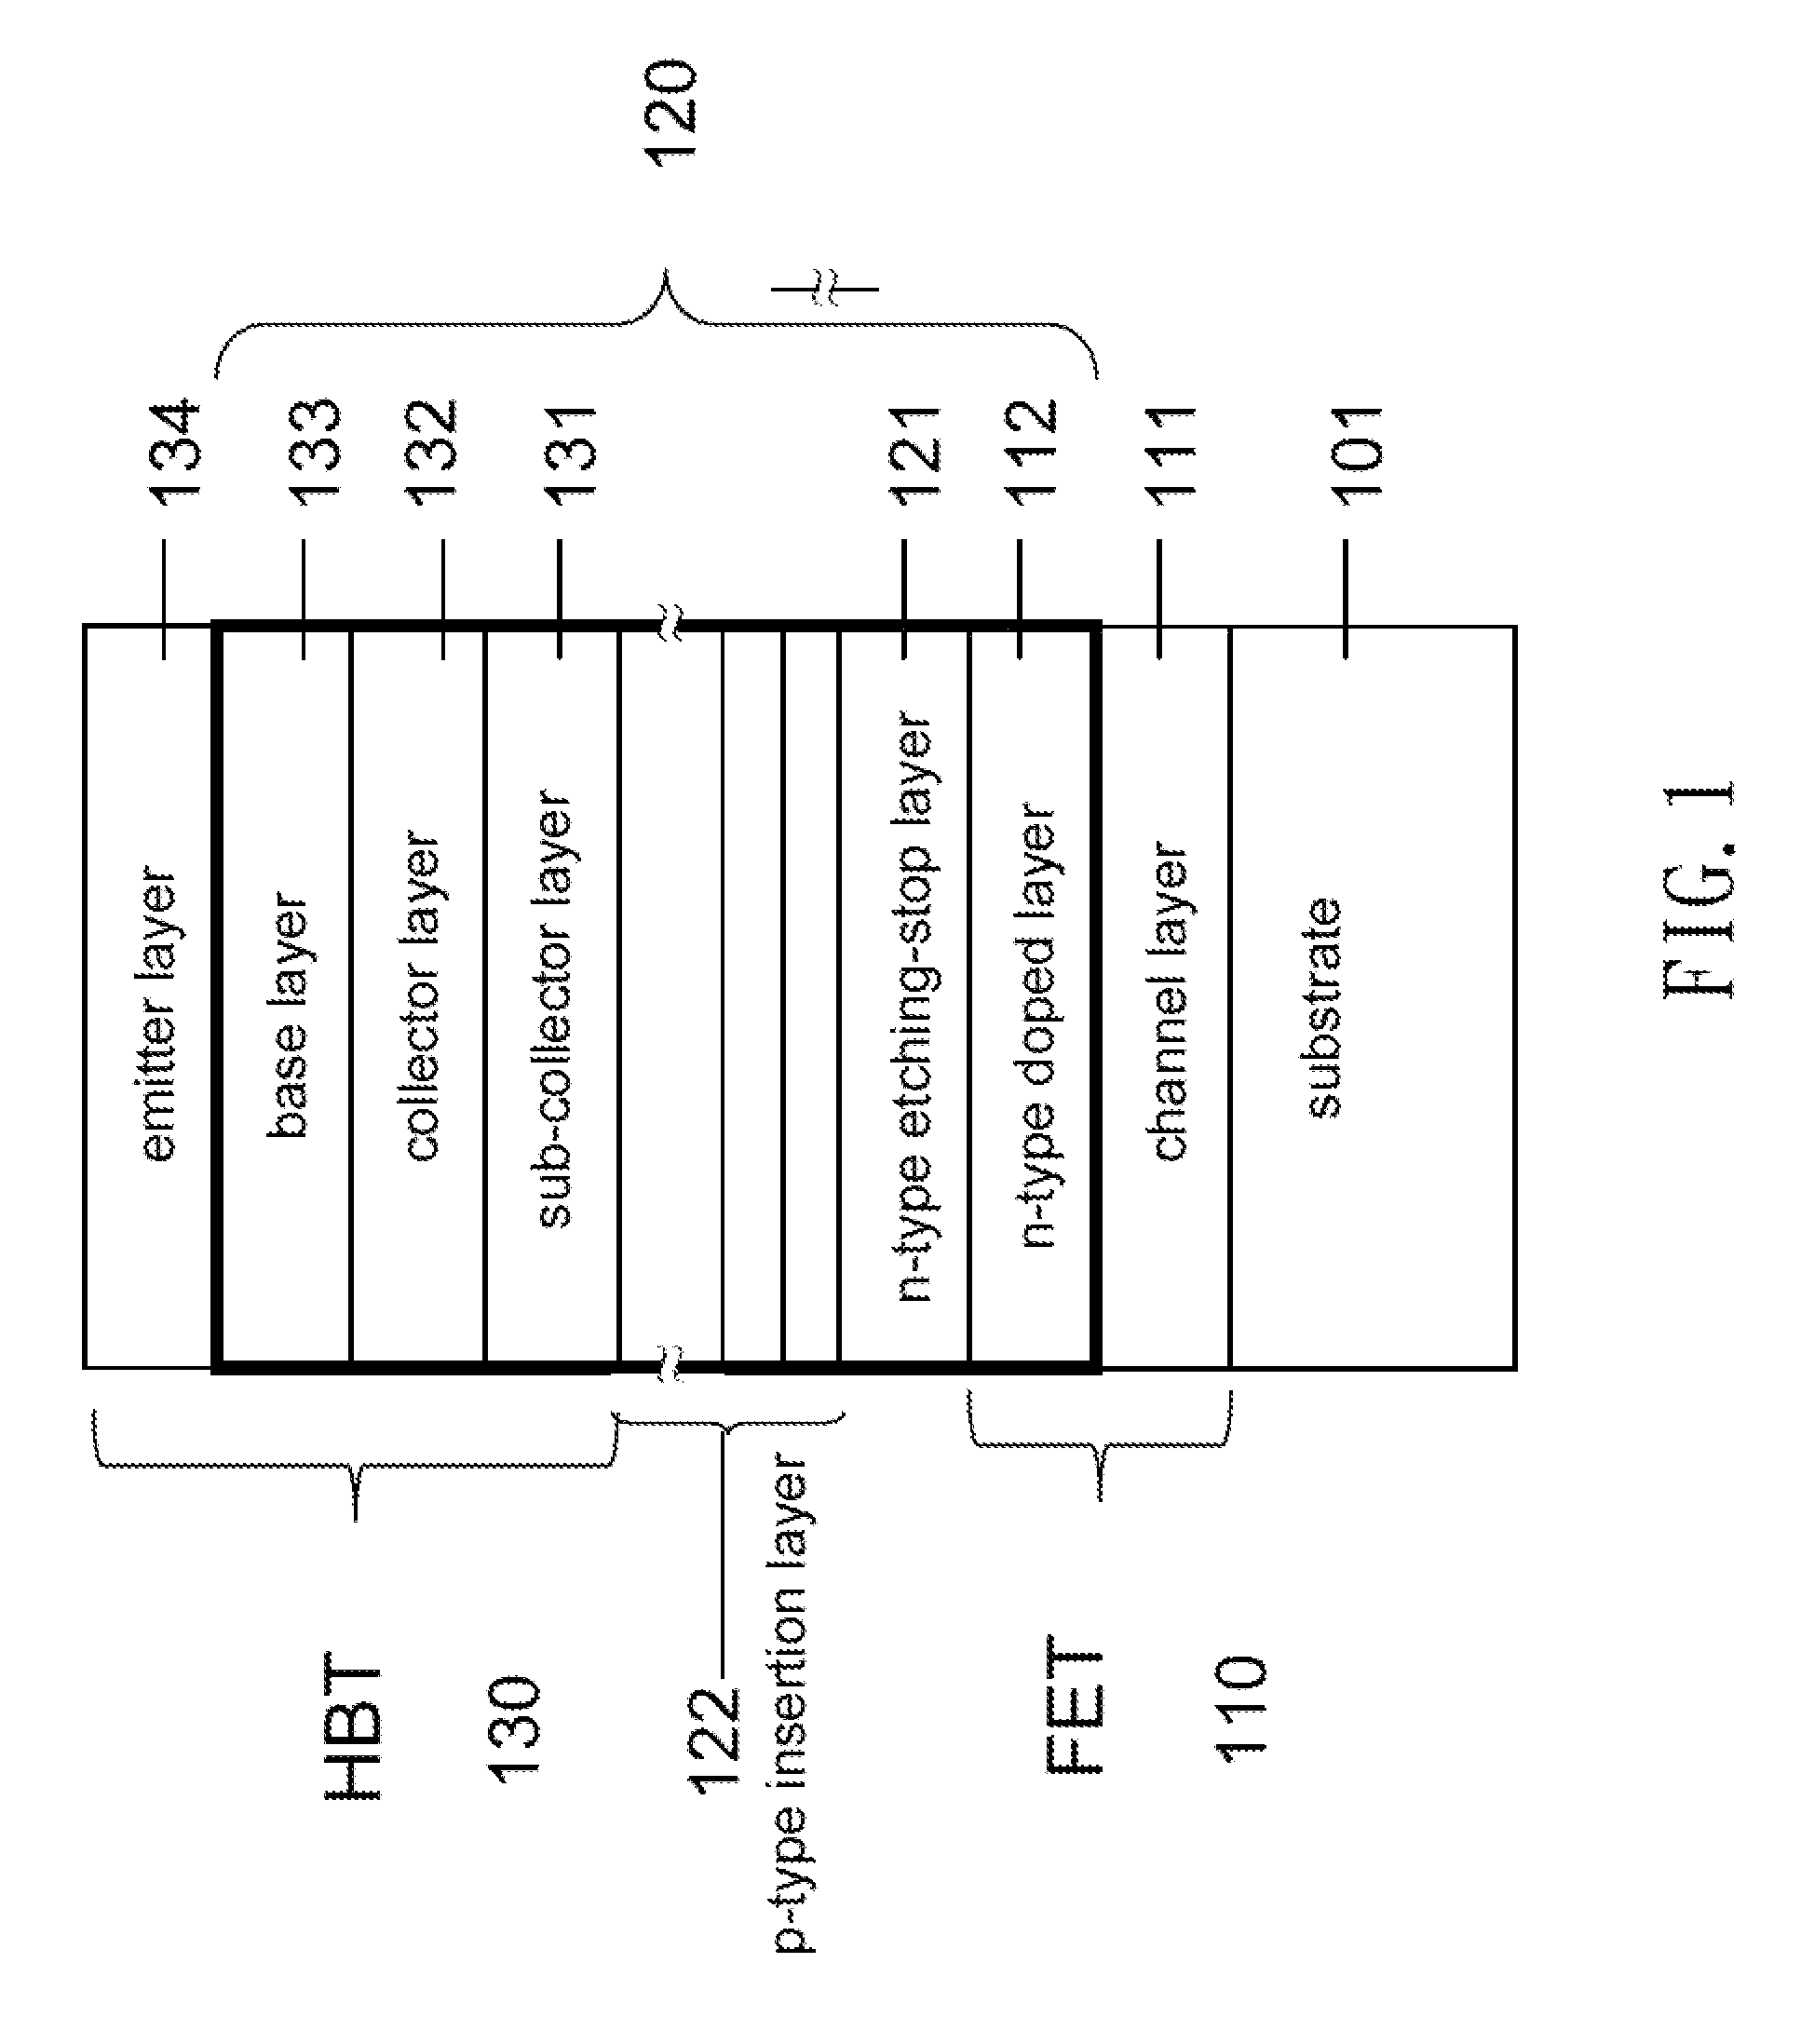 Monolithic compound semiconductor structure